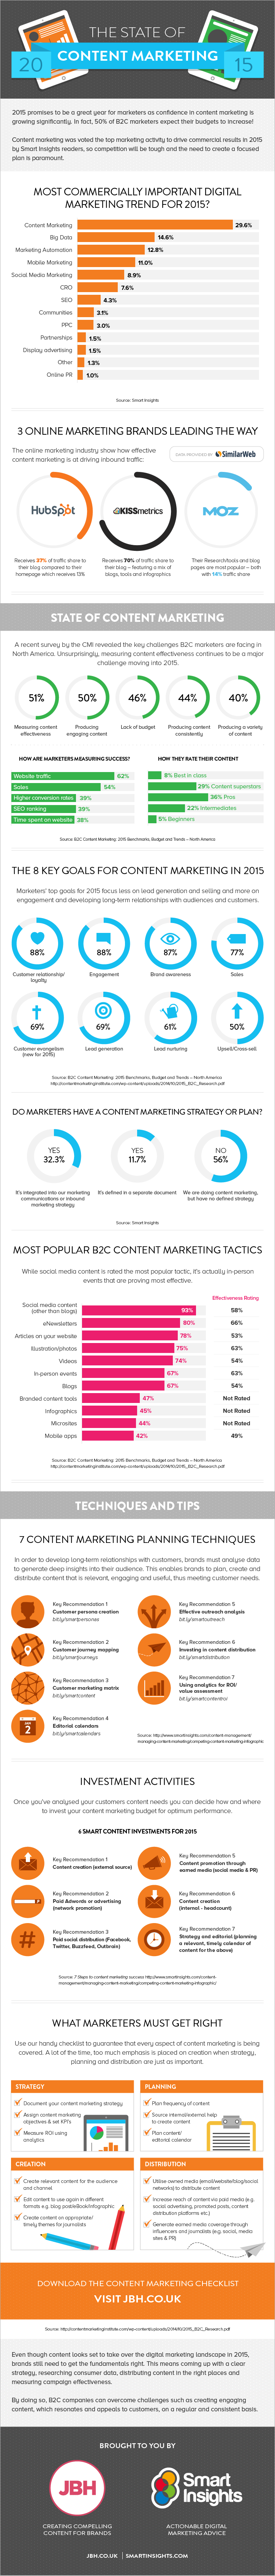 State of Content Marketing 201511 copy